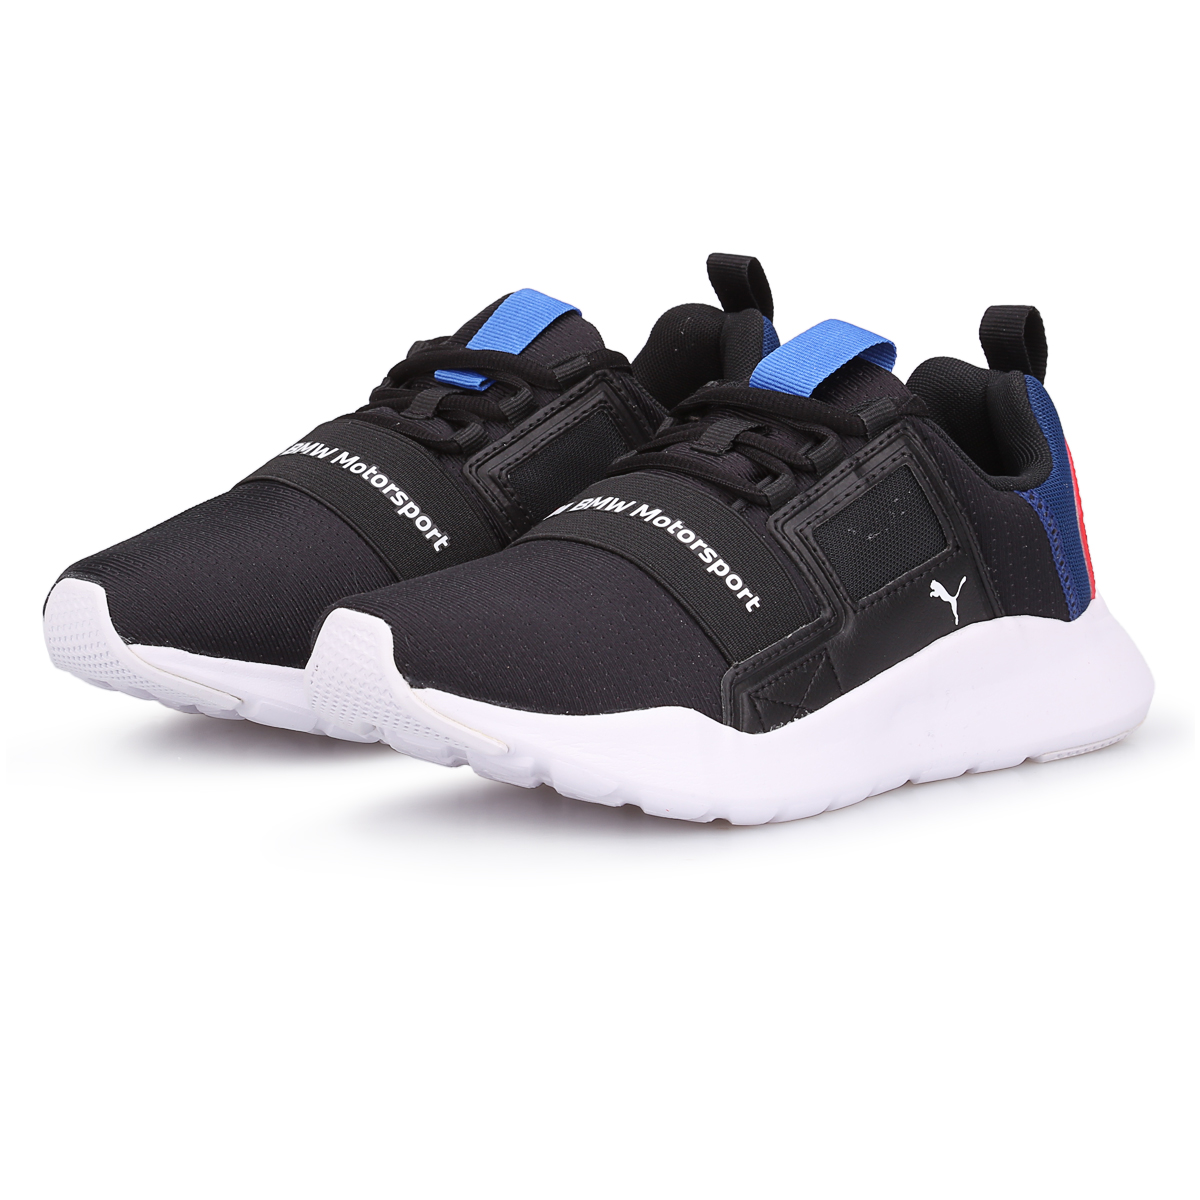 Zapatillas Puma BMW Motorsport Wired Cage,  image number null